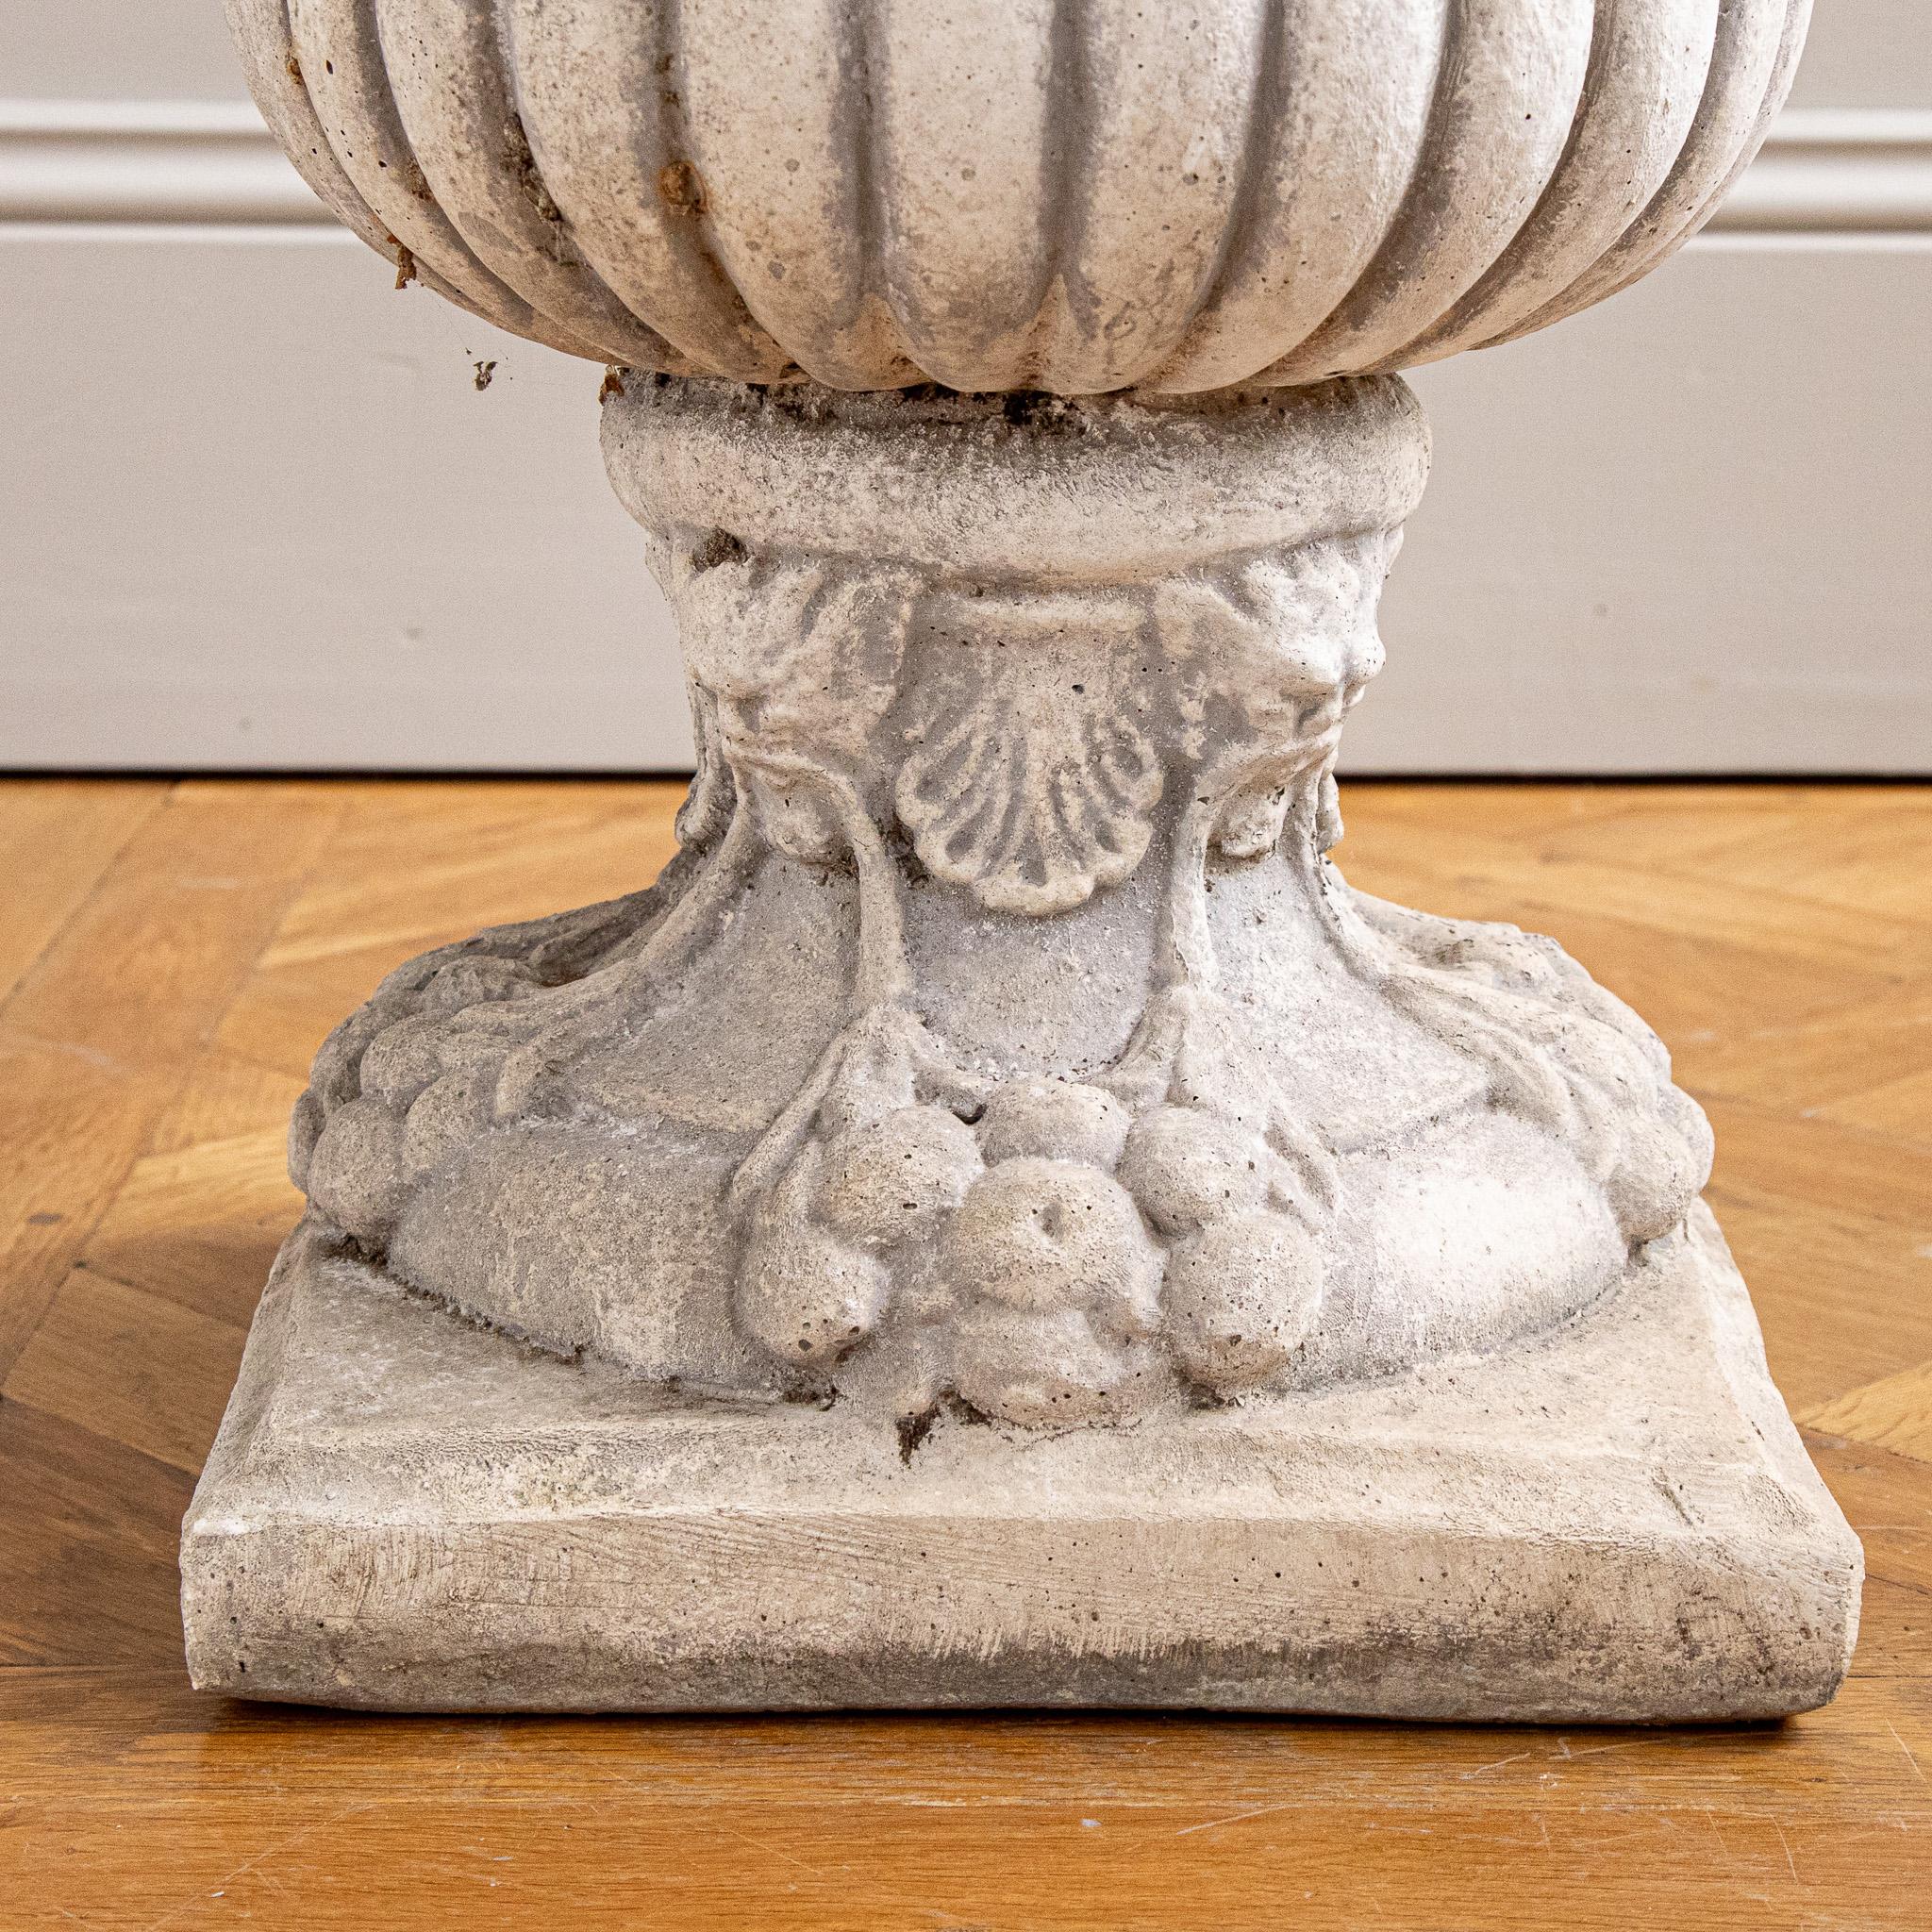 Circa Mid 1900's Set Of 4 Decorative Italian Garden Urns In Reconstituted Stone For Sale 3